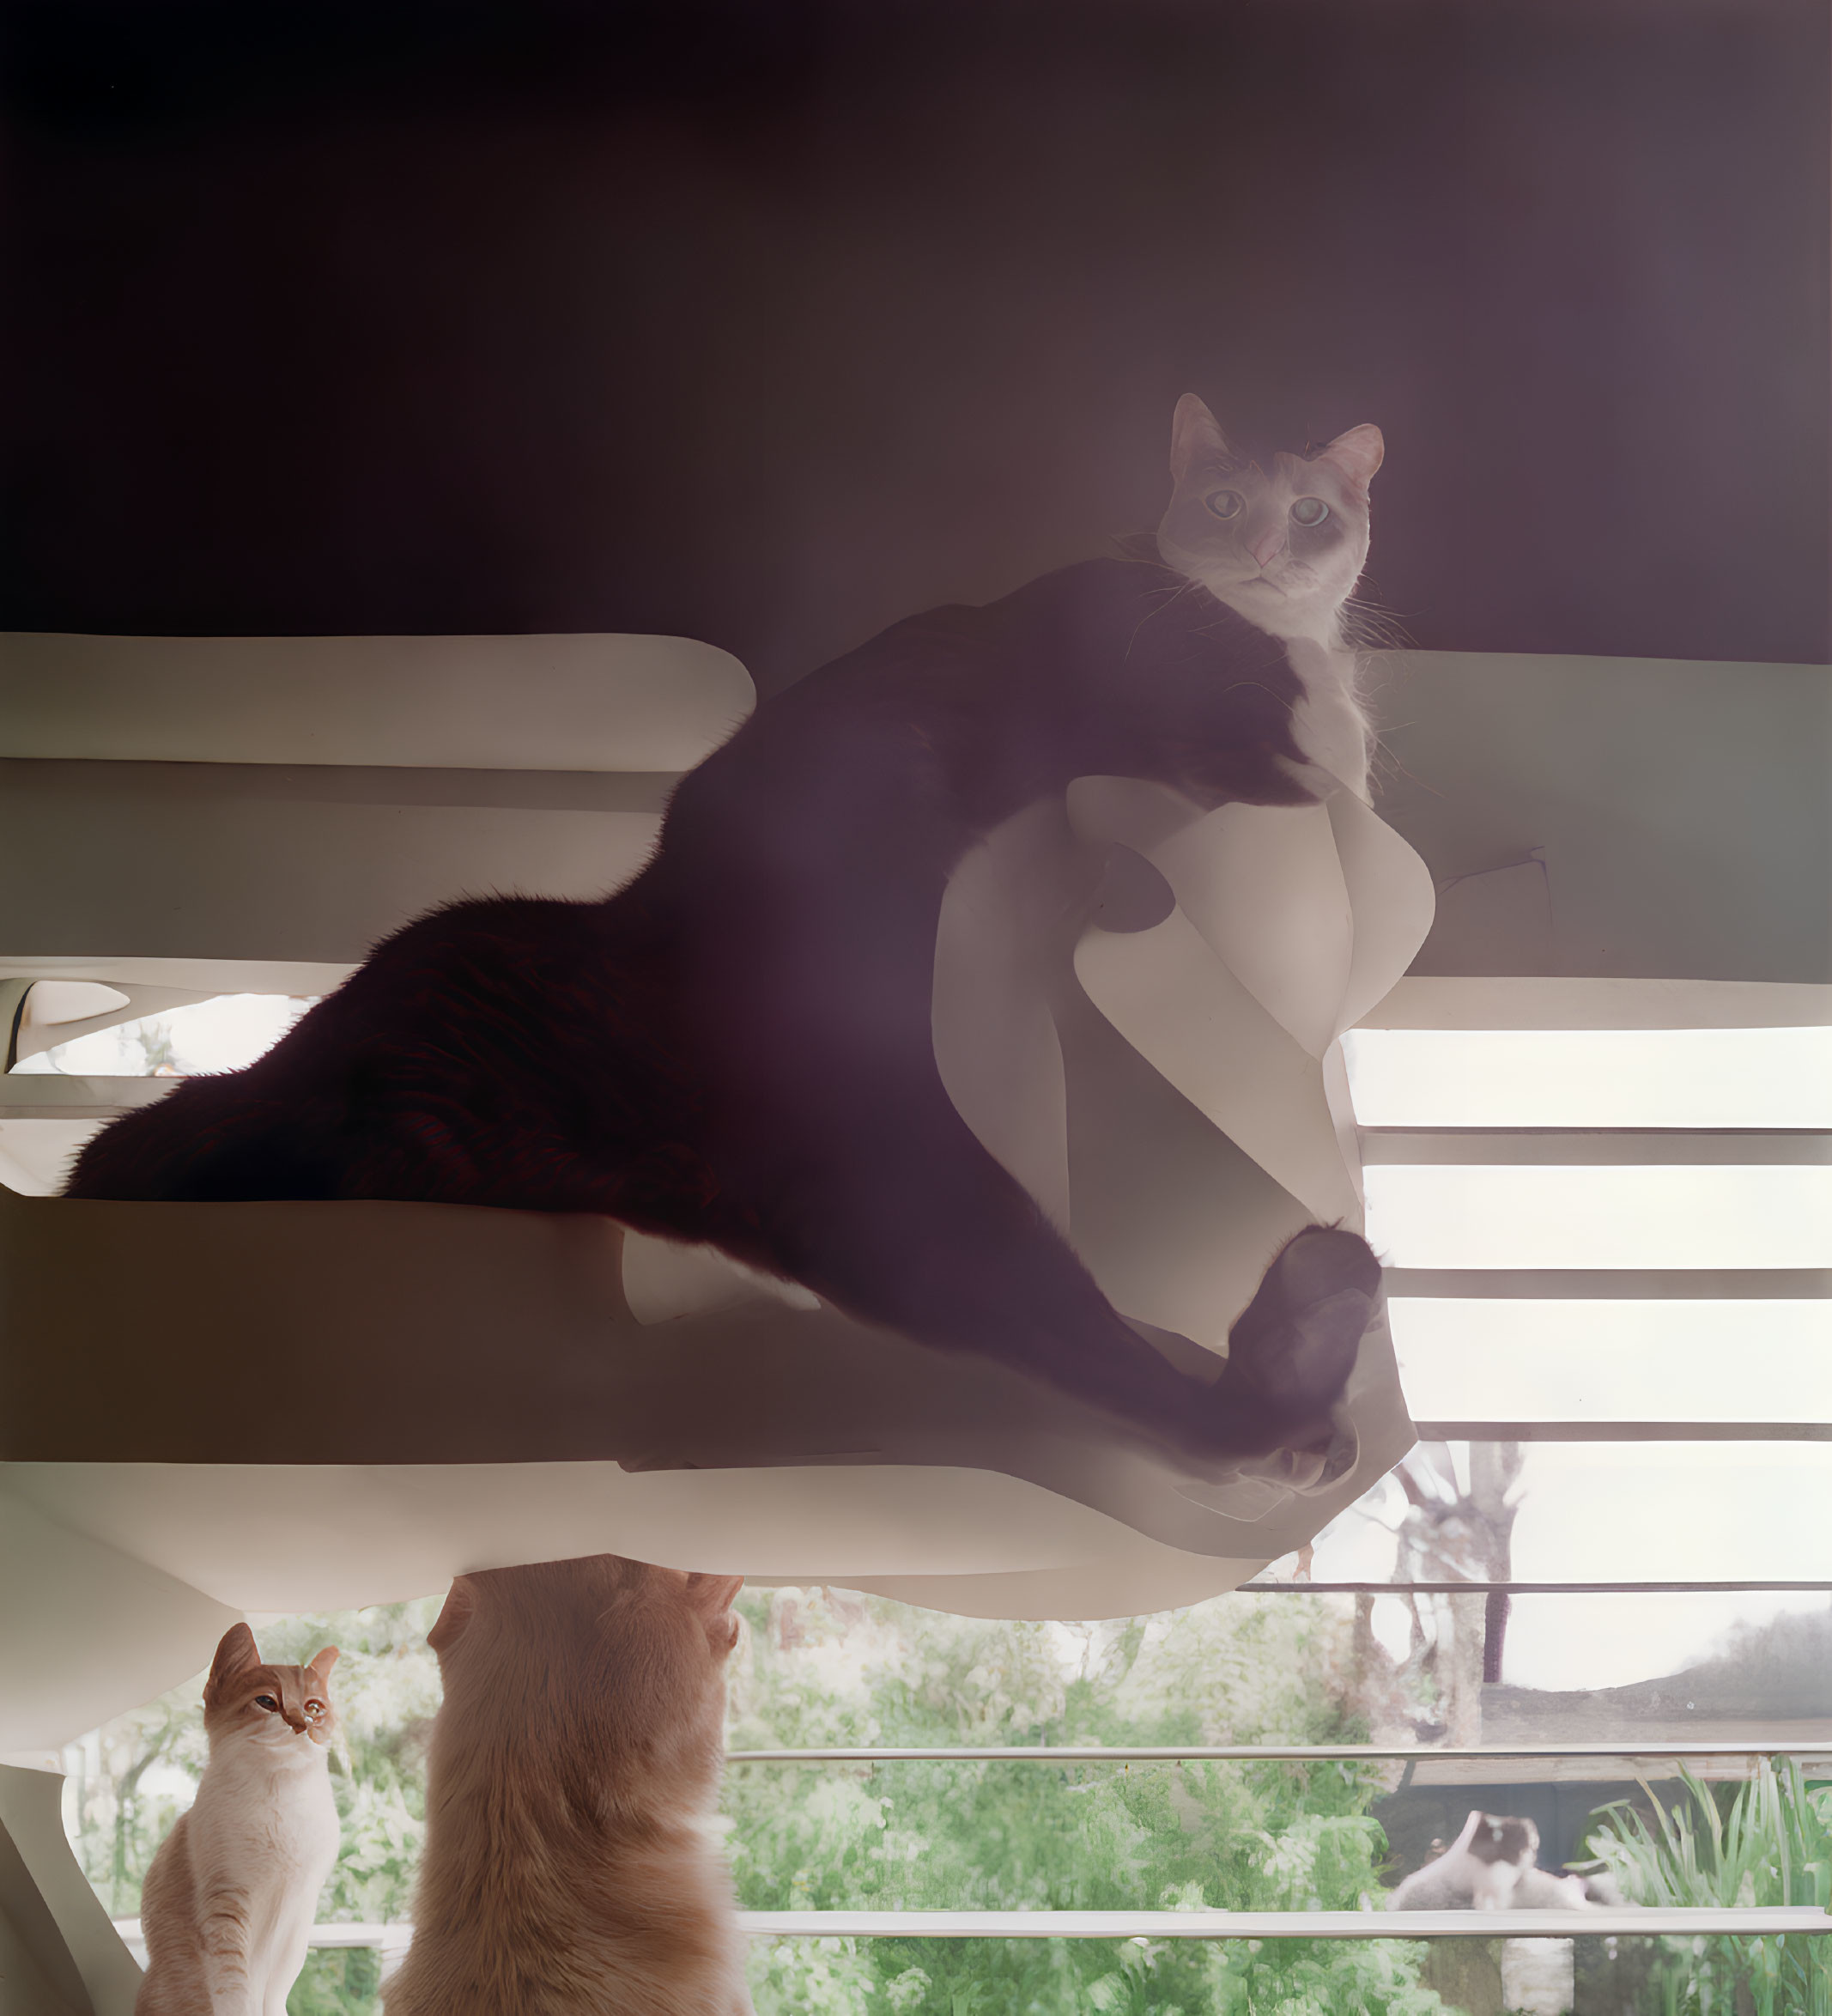 Three cats in black and white - one lounging on a window blind, two watching.